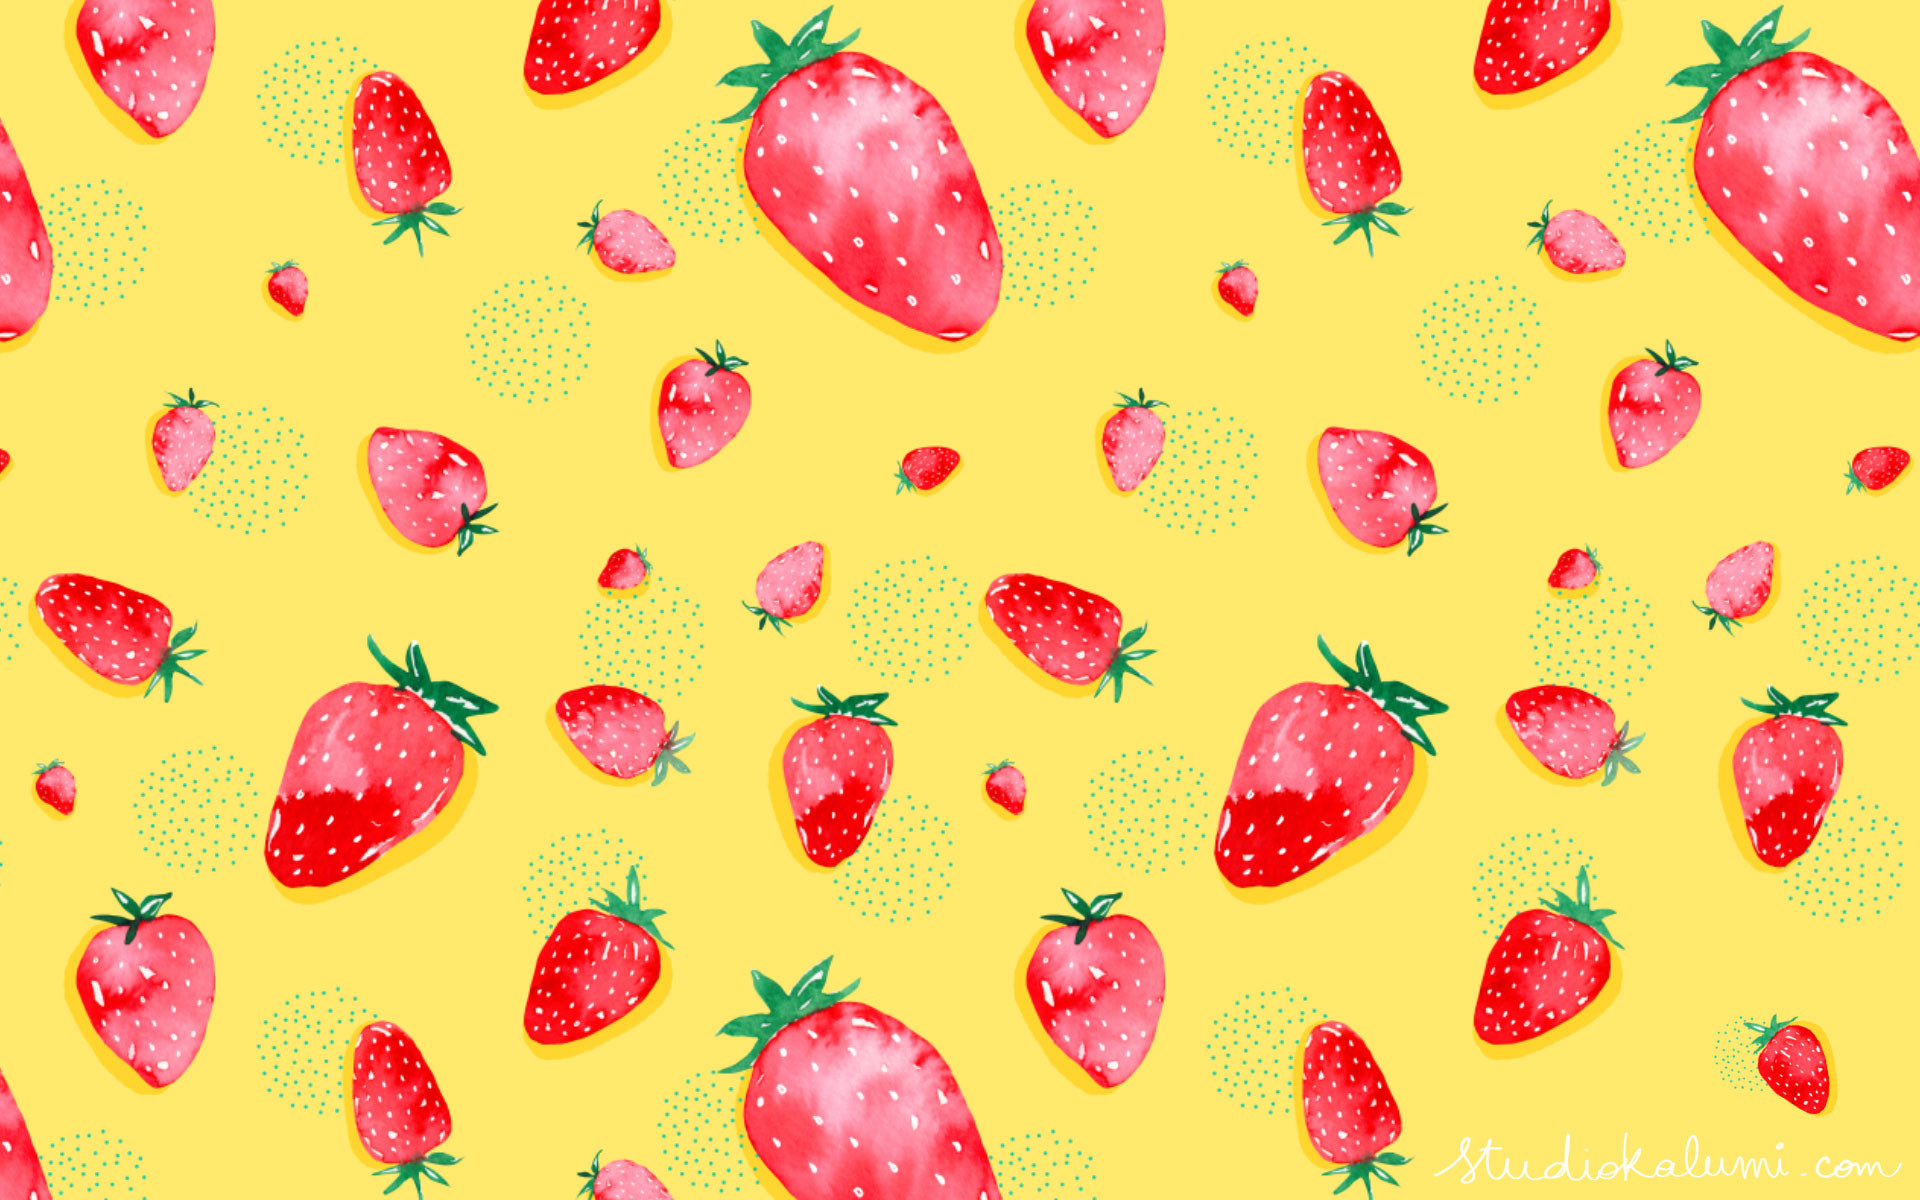 1920x1200 Downloads Made With Love And Watercolor Strawberry Field Desktop Wallpaper.  home depot christmas decorations.